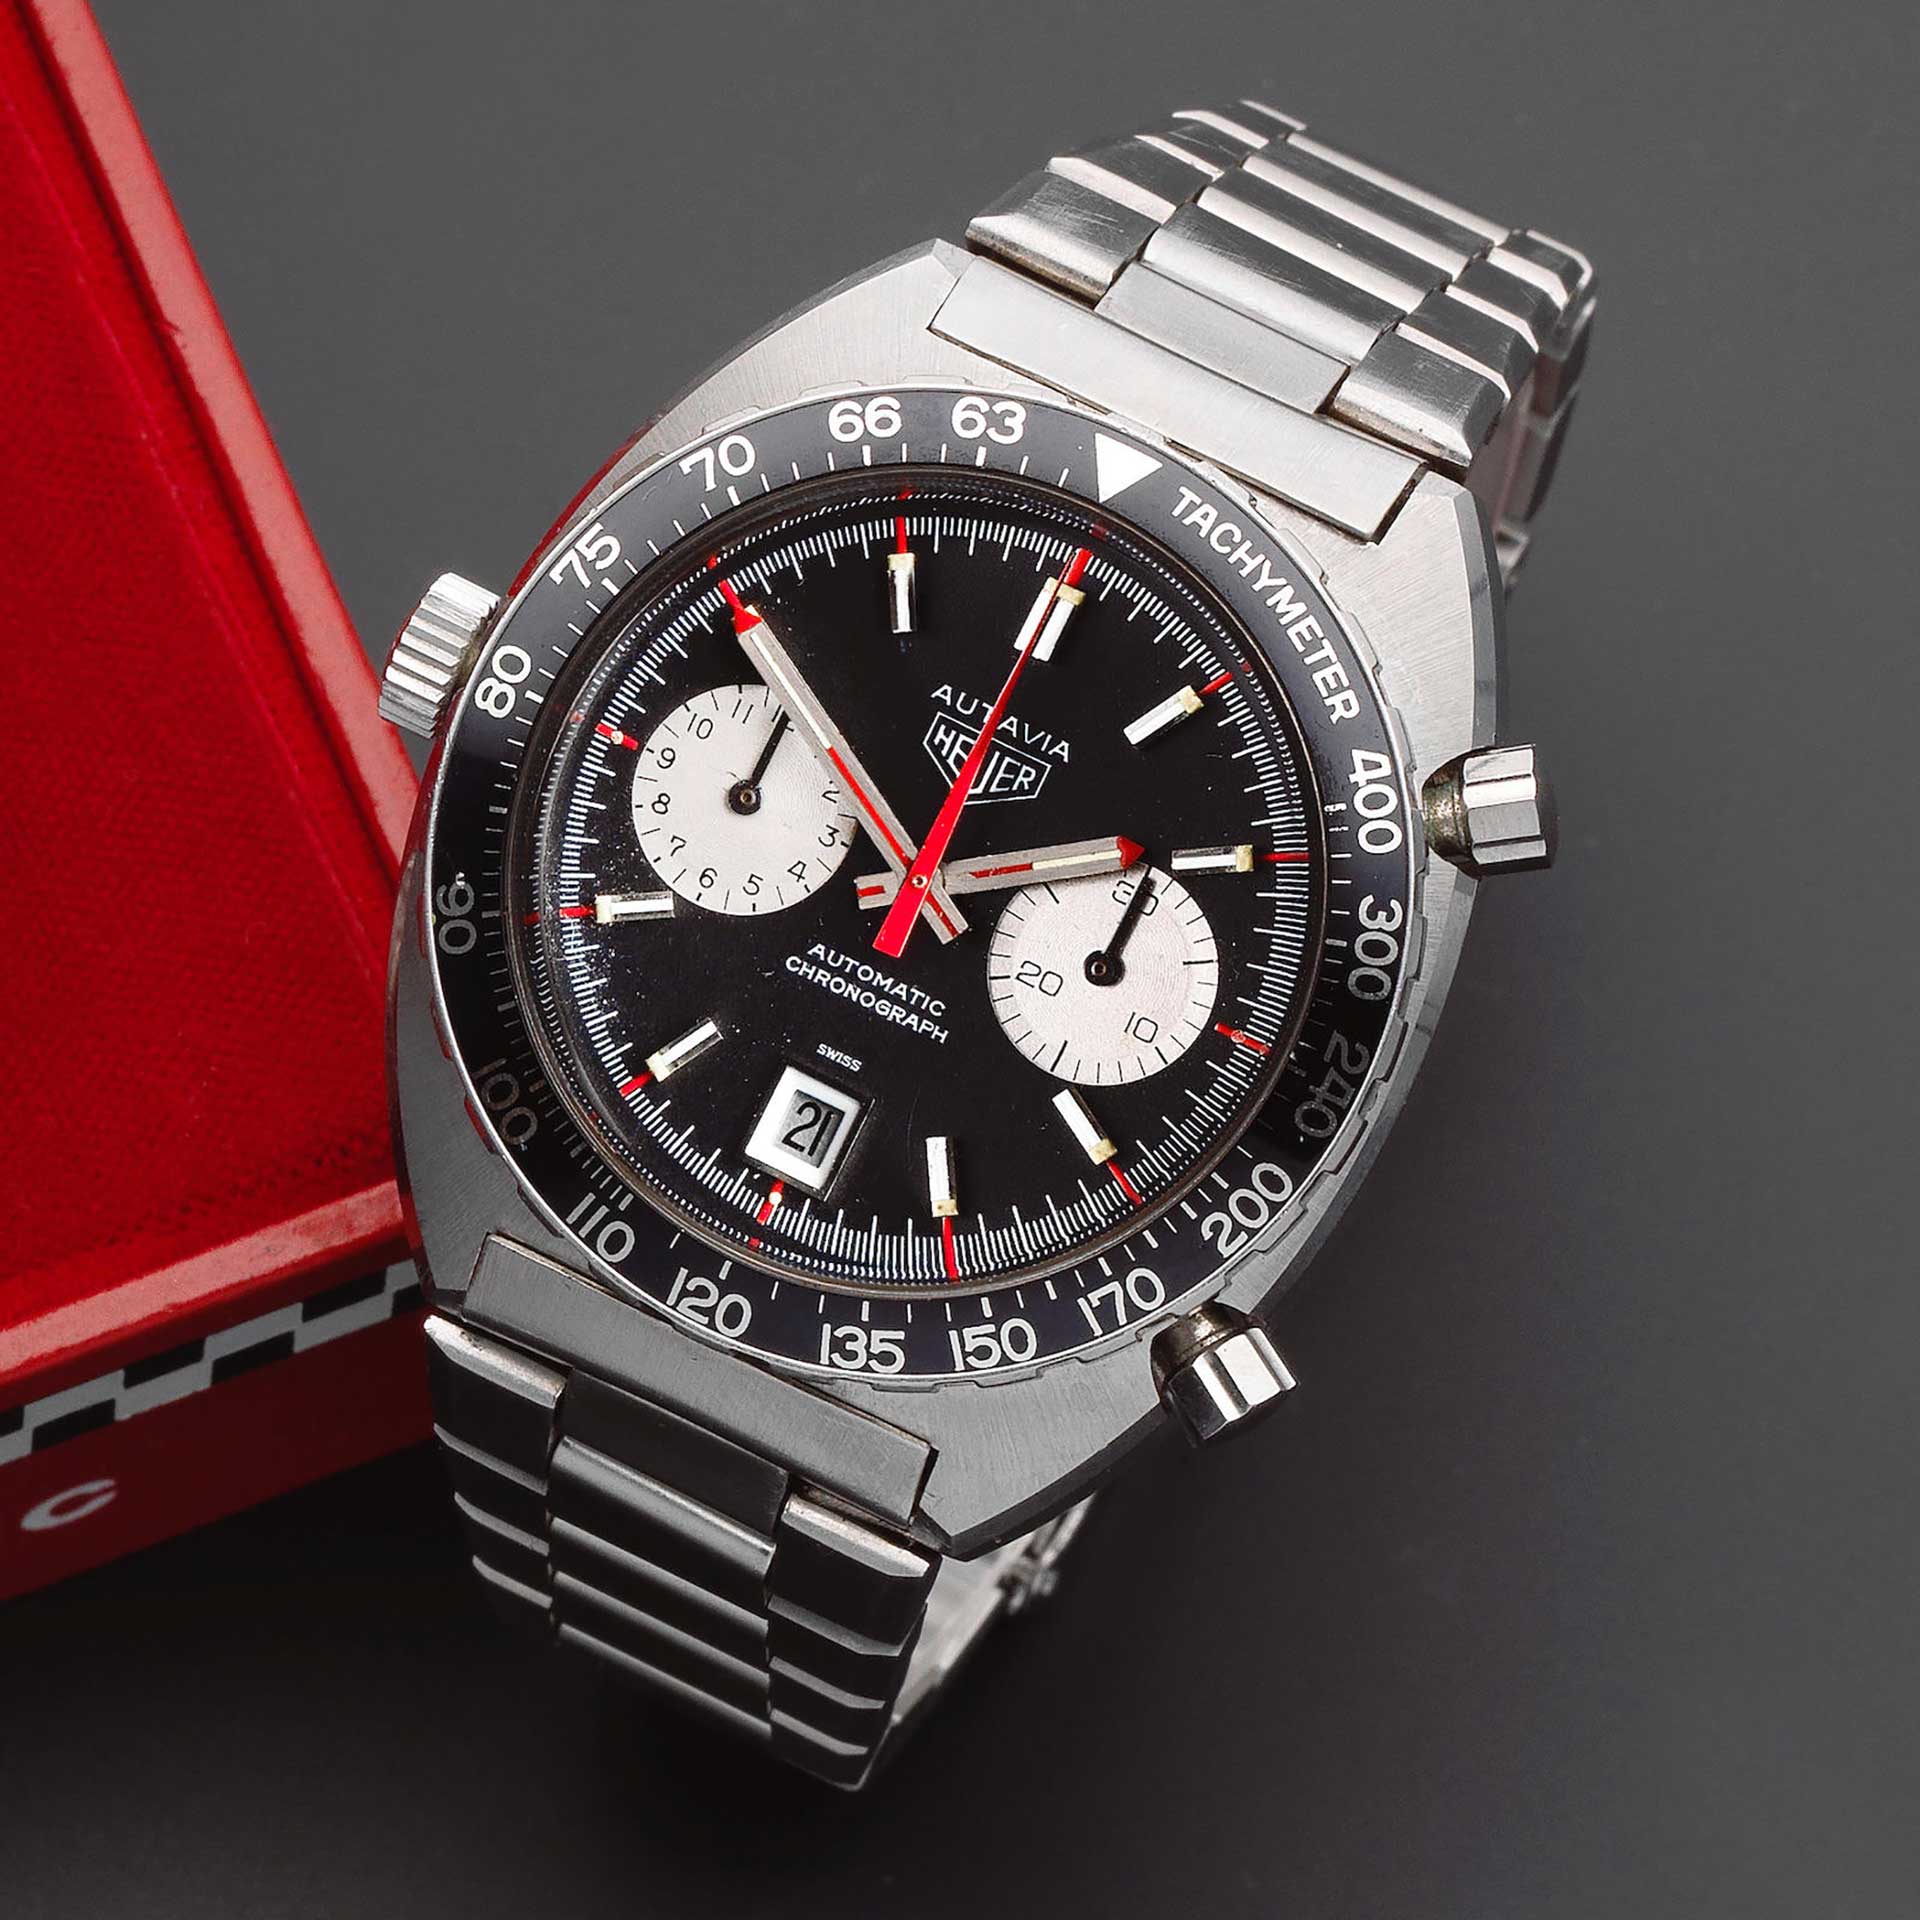 LOT 36 Heuer Stainless Steel Automatic Calendar Chronograph